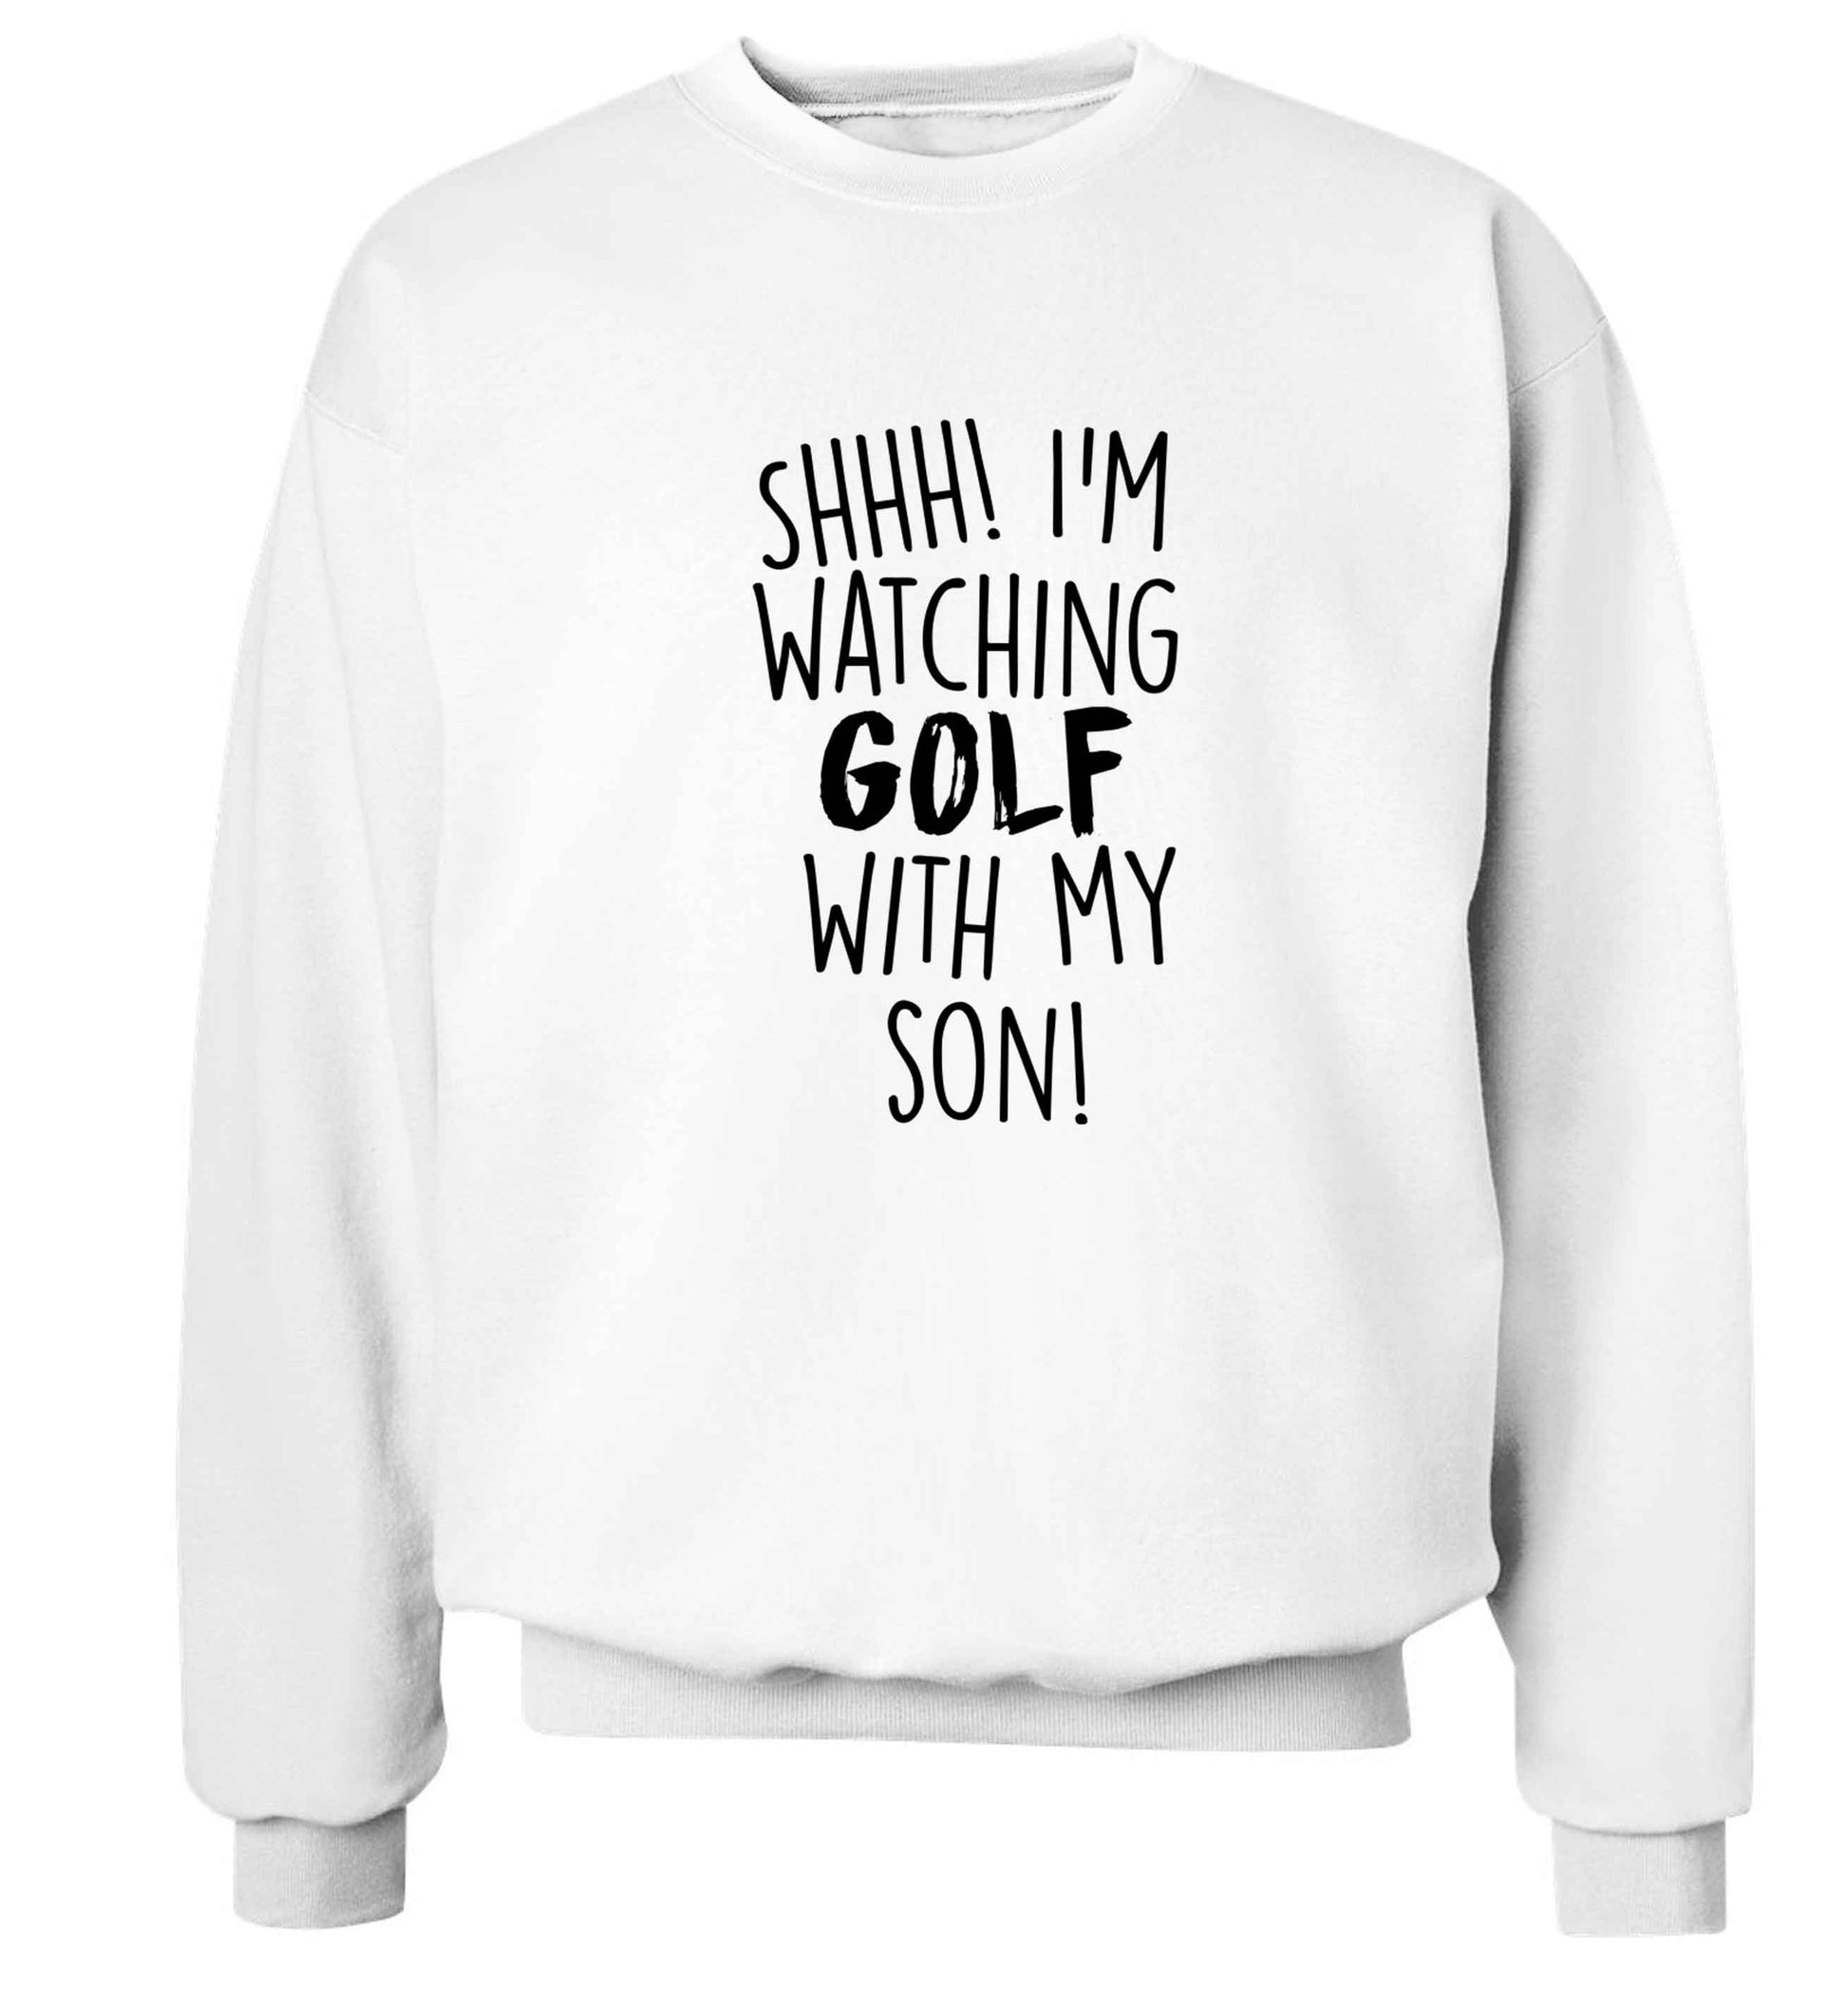 Shh I'm watching golf with my son Adult's unisex white Sweater 2XL